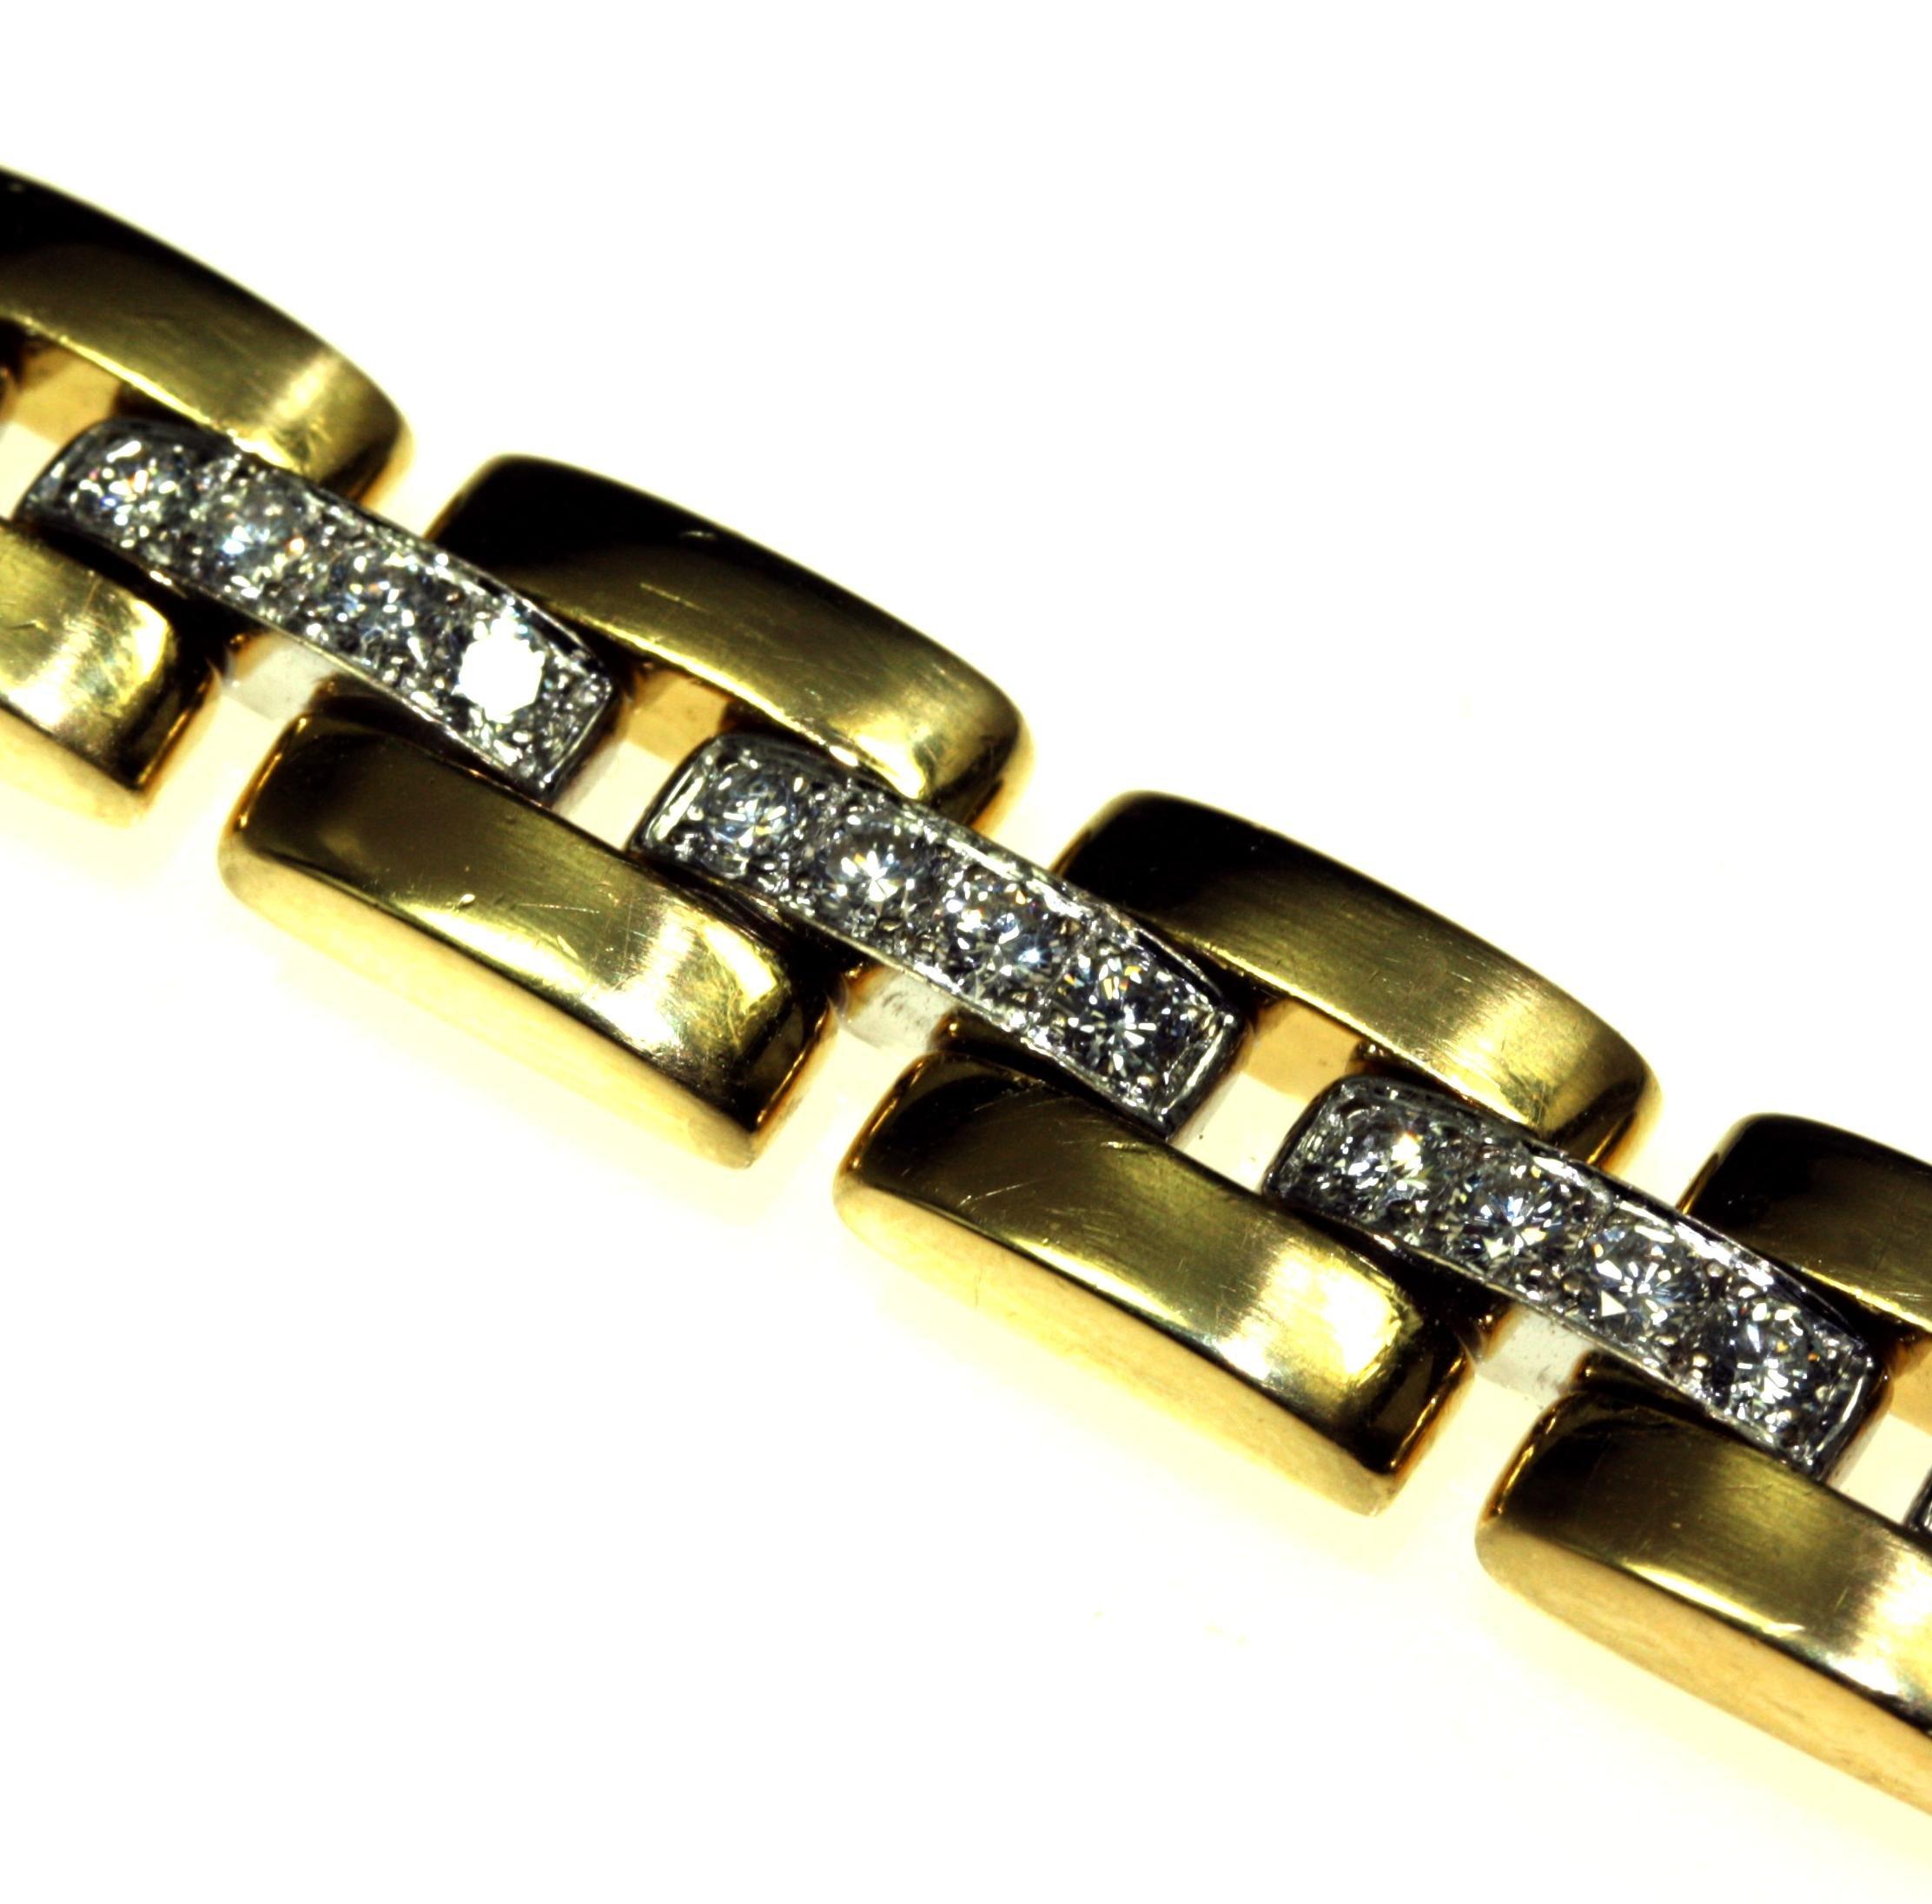 The bracelet 18ctwhite and yellow gold, comprising a row of fifteen diamond set bar links in white gold, between two rows of yellow gold bar links. Four brilliant cut diamonds are grain set in each of the white gold bars. The diamonds are .06ct